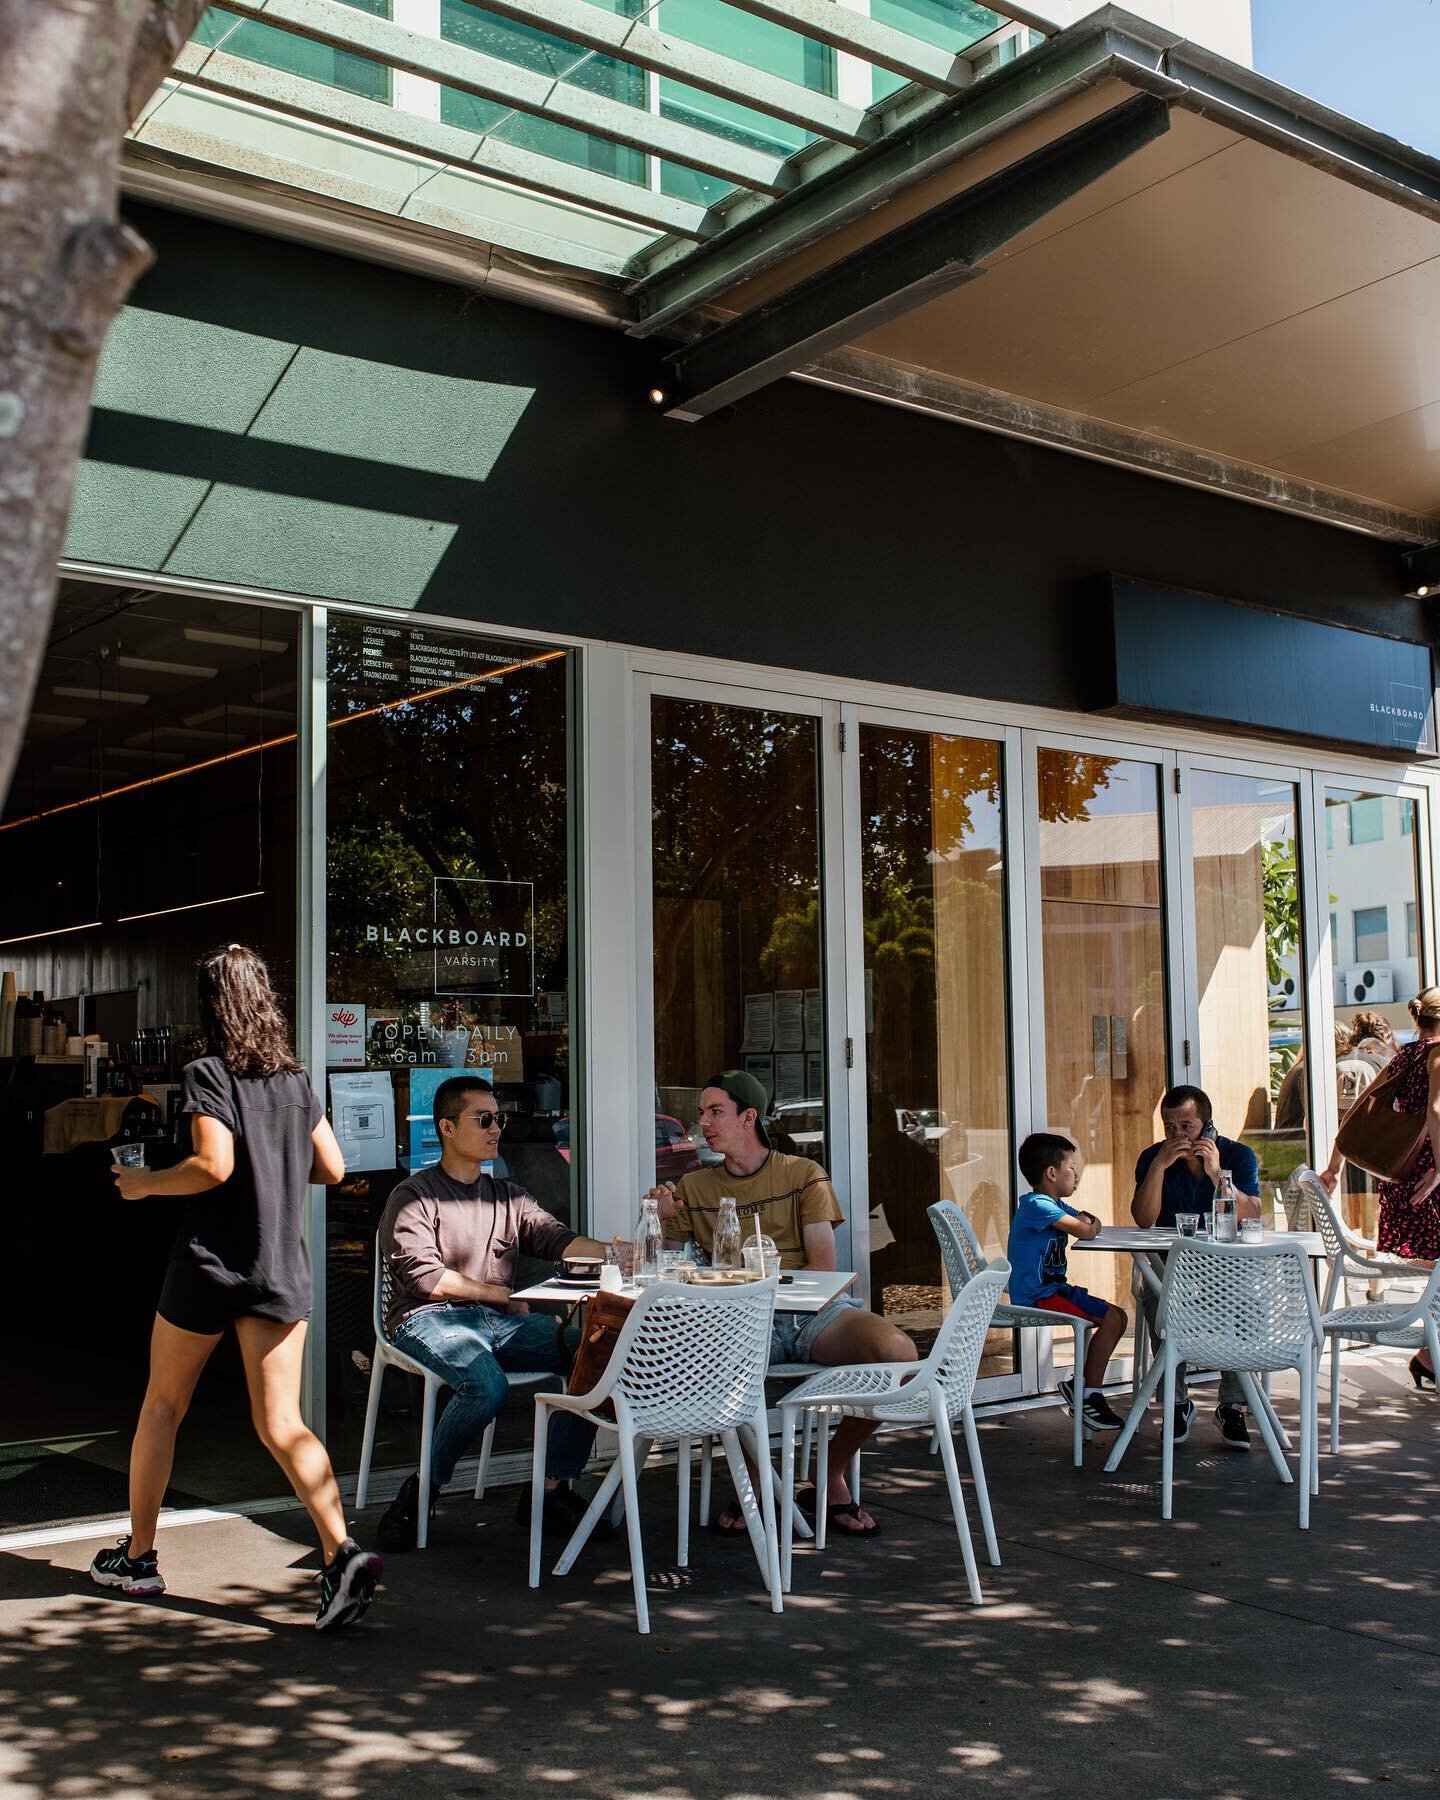 Friyay! Grab the crew, come down for some delicious lunch to wind down the week 

#drinkcoffee #coffeegram #coffeeshop #coffeeporn #coffeevibes #cafevibes #coffeeculture #dailycoffee #cafegoldcoast #coffee_inst #coffeeislove #coffeeplease #blackcoffe